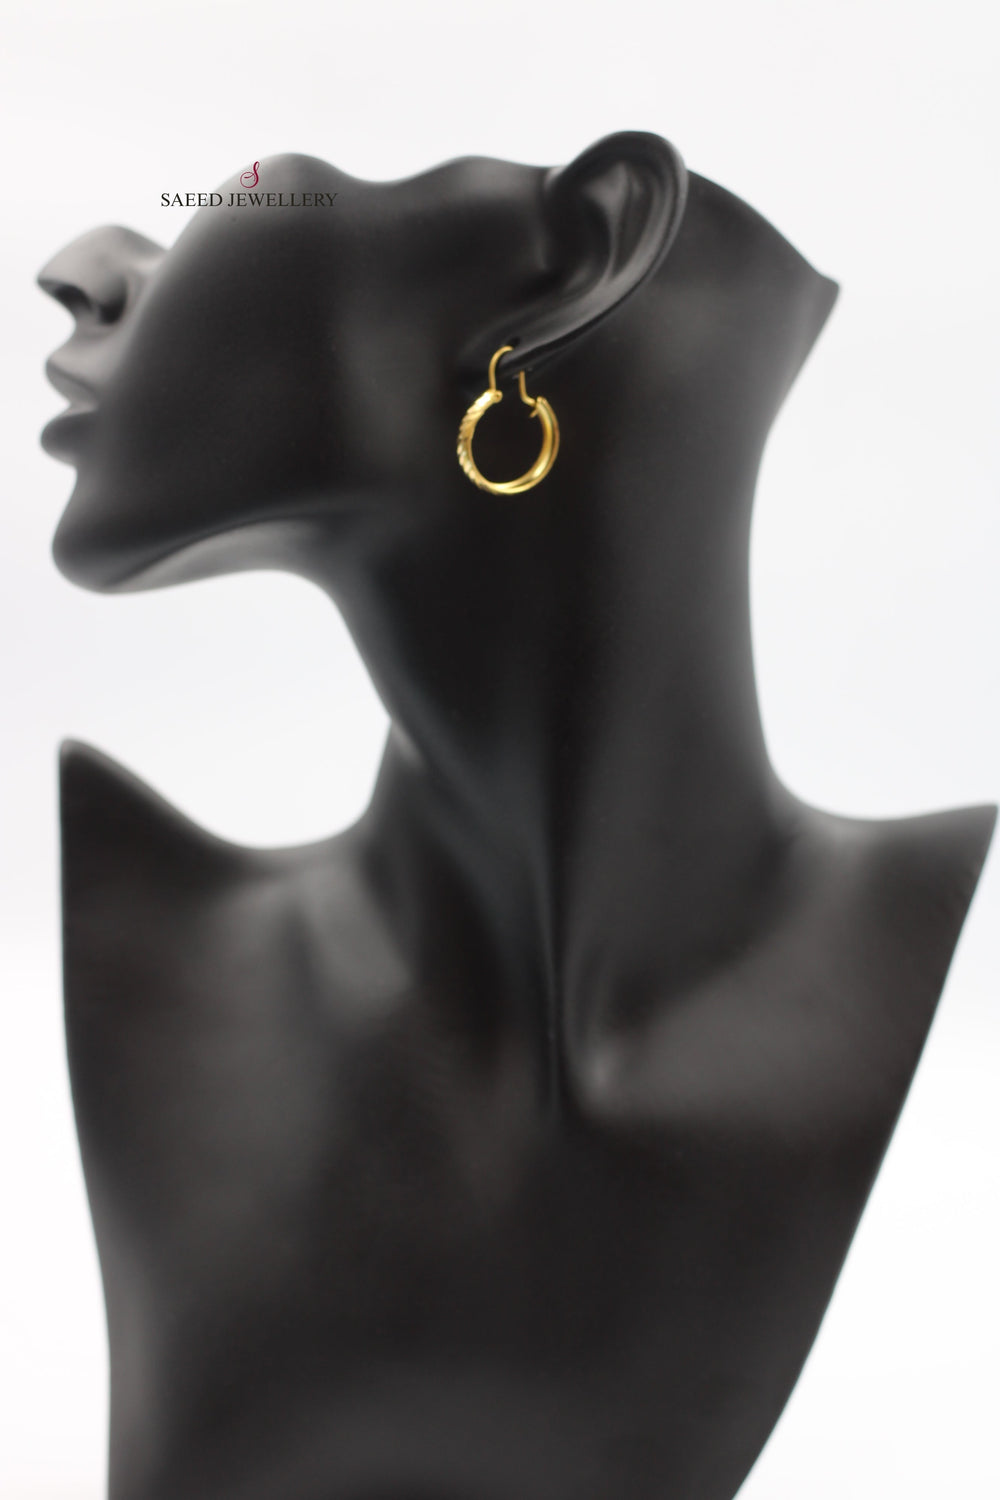 21K Rounded Earrings Made of 21K Yellow Gold by Saeed Jewelry-حلق-ذبلة-3